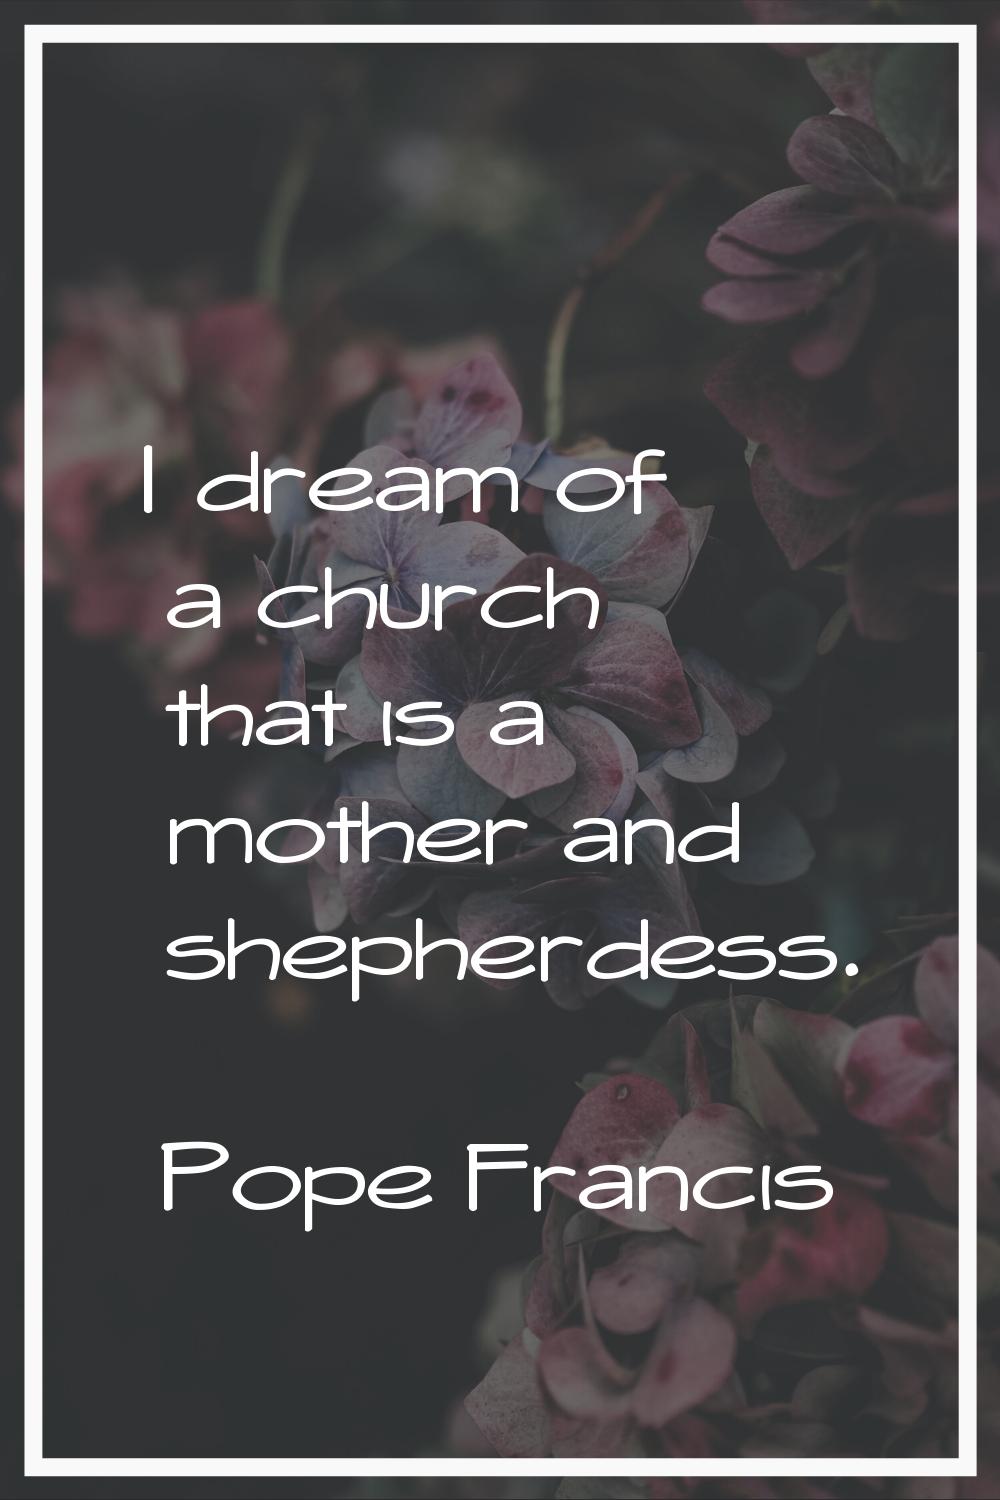 I dream of a church that is a mother and shepherdess.